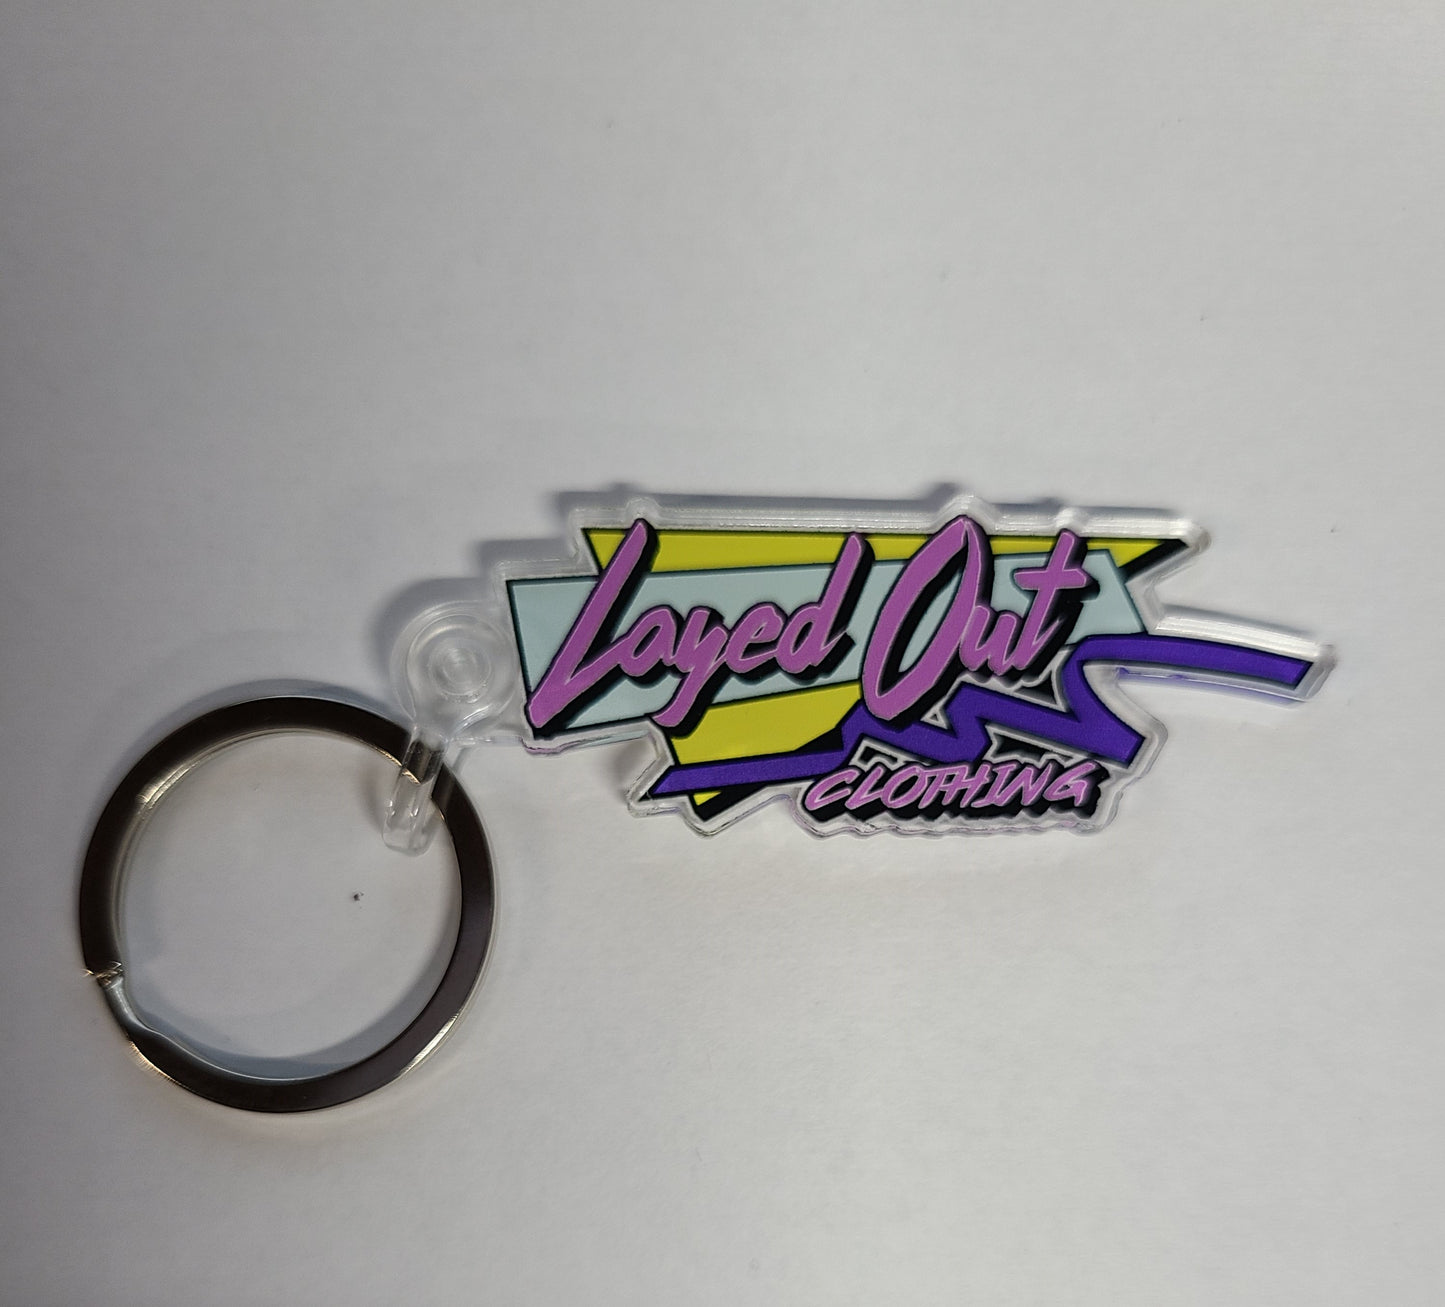 Retro Layed Out Keychains